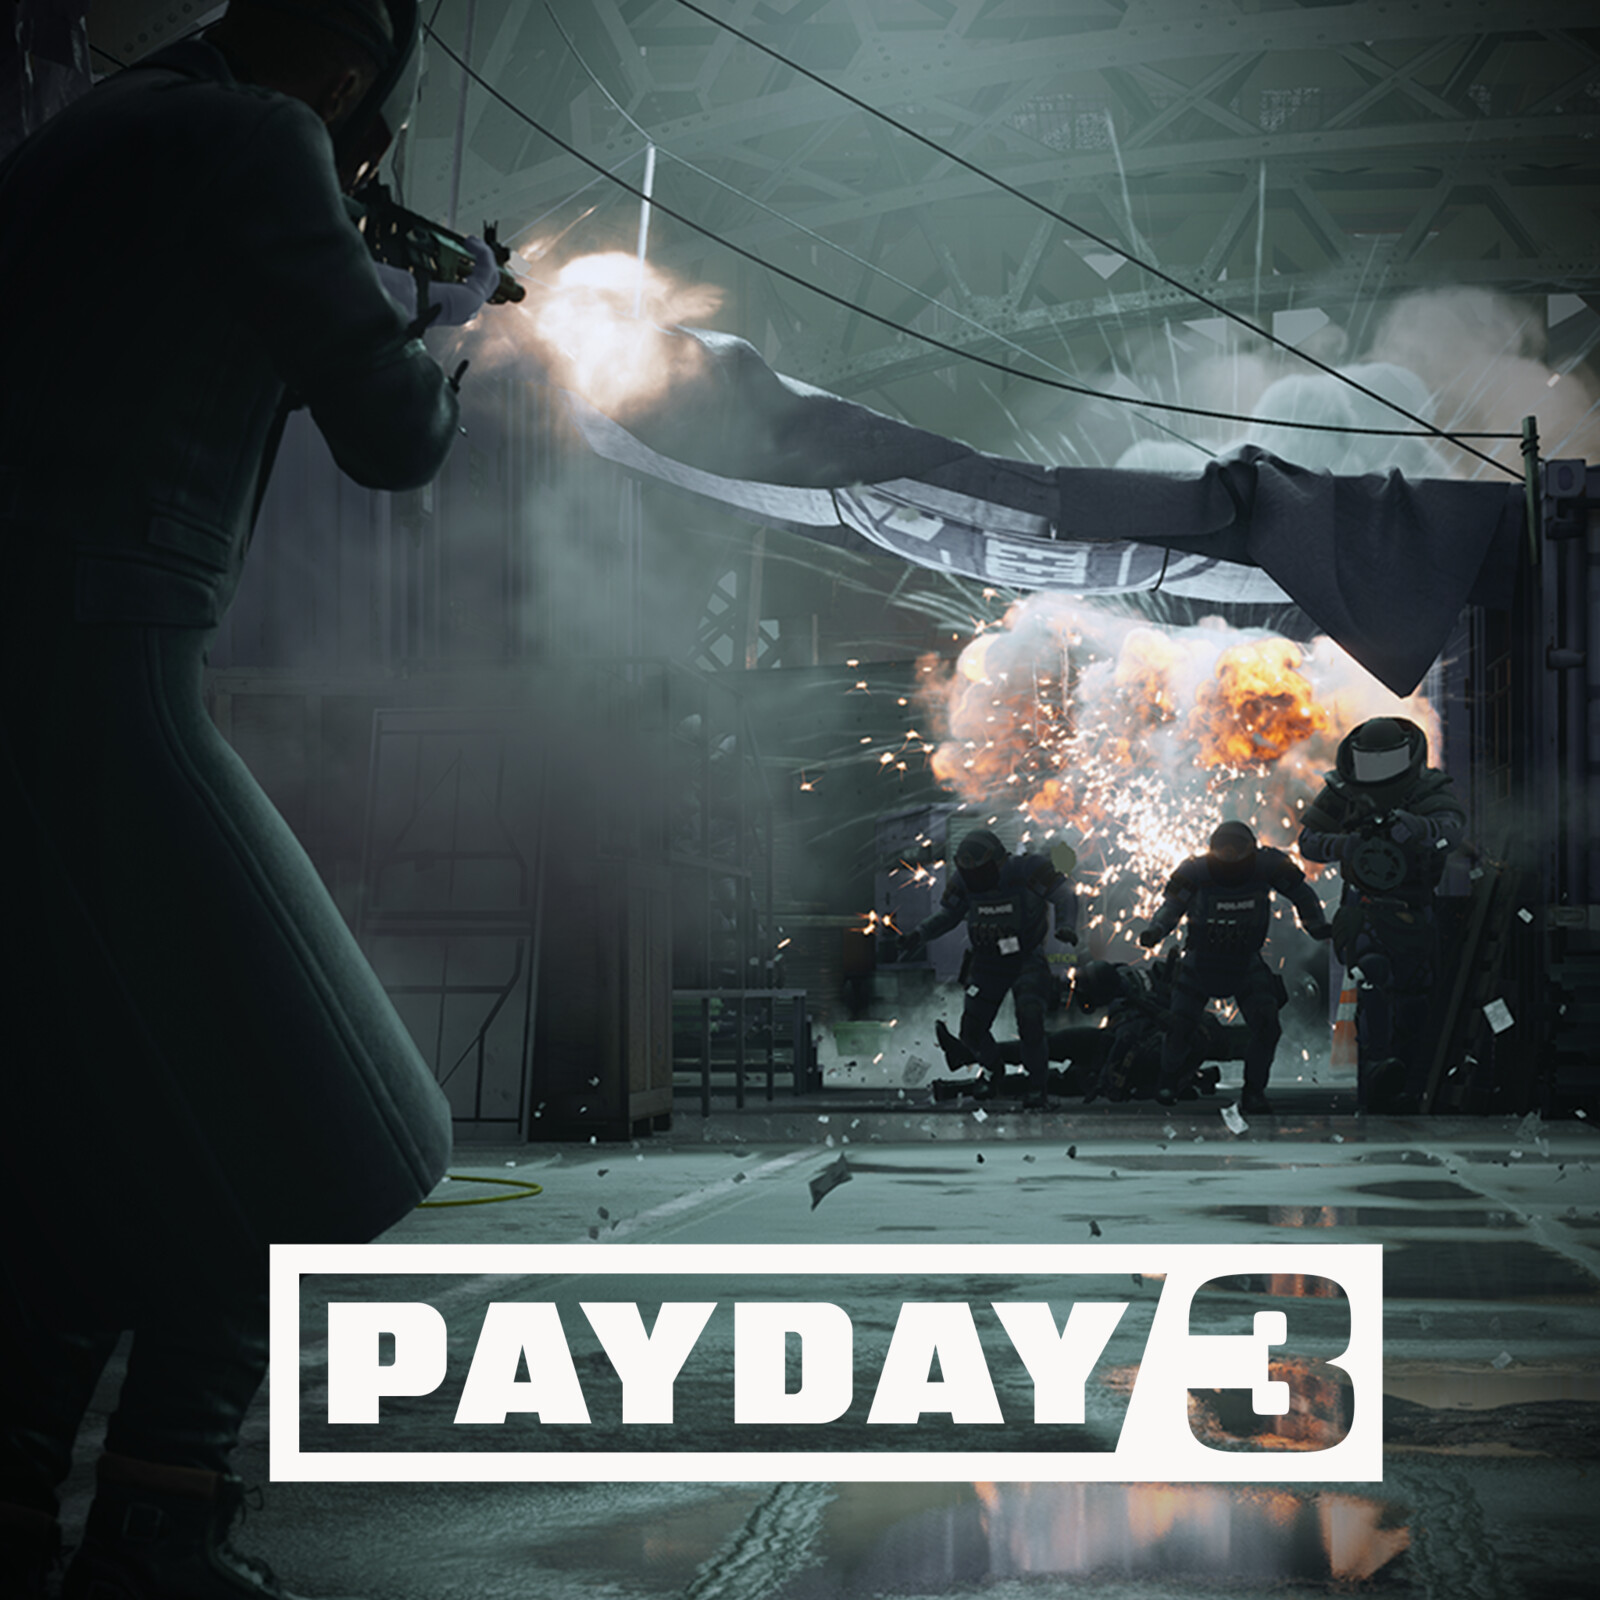 Payday 3 - Road rage